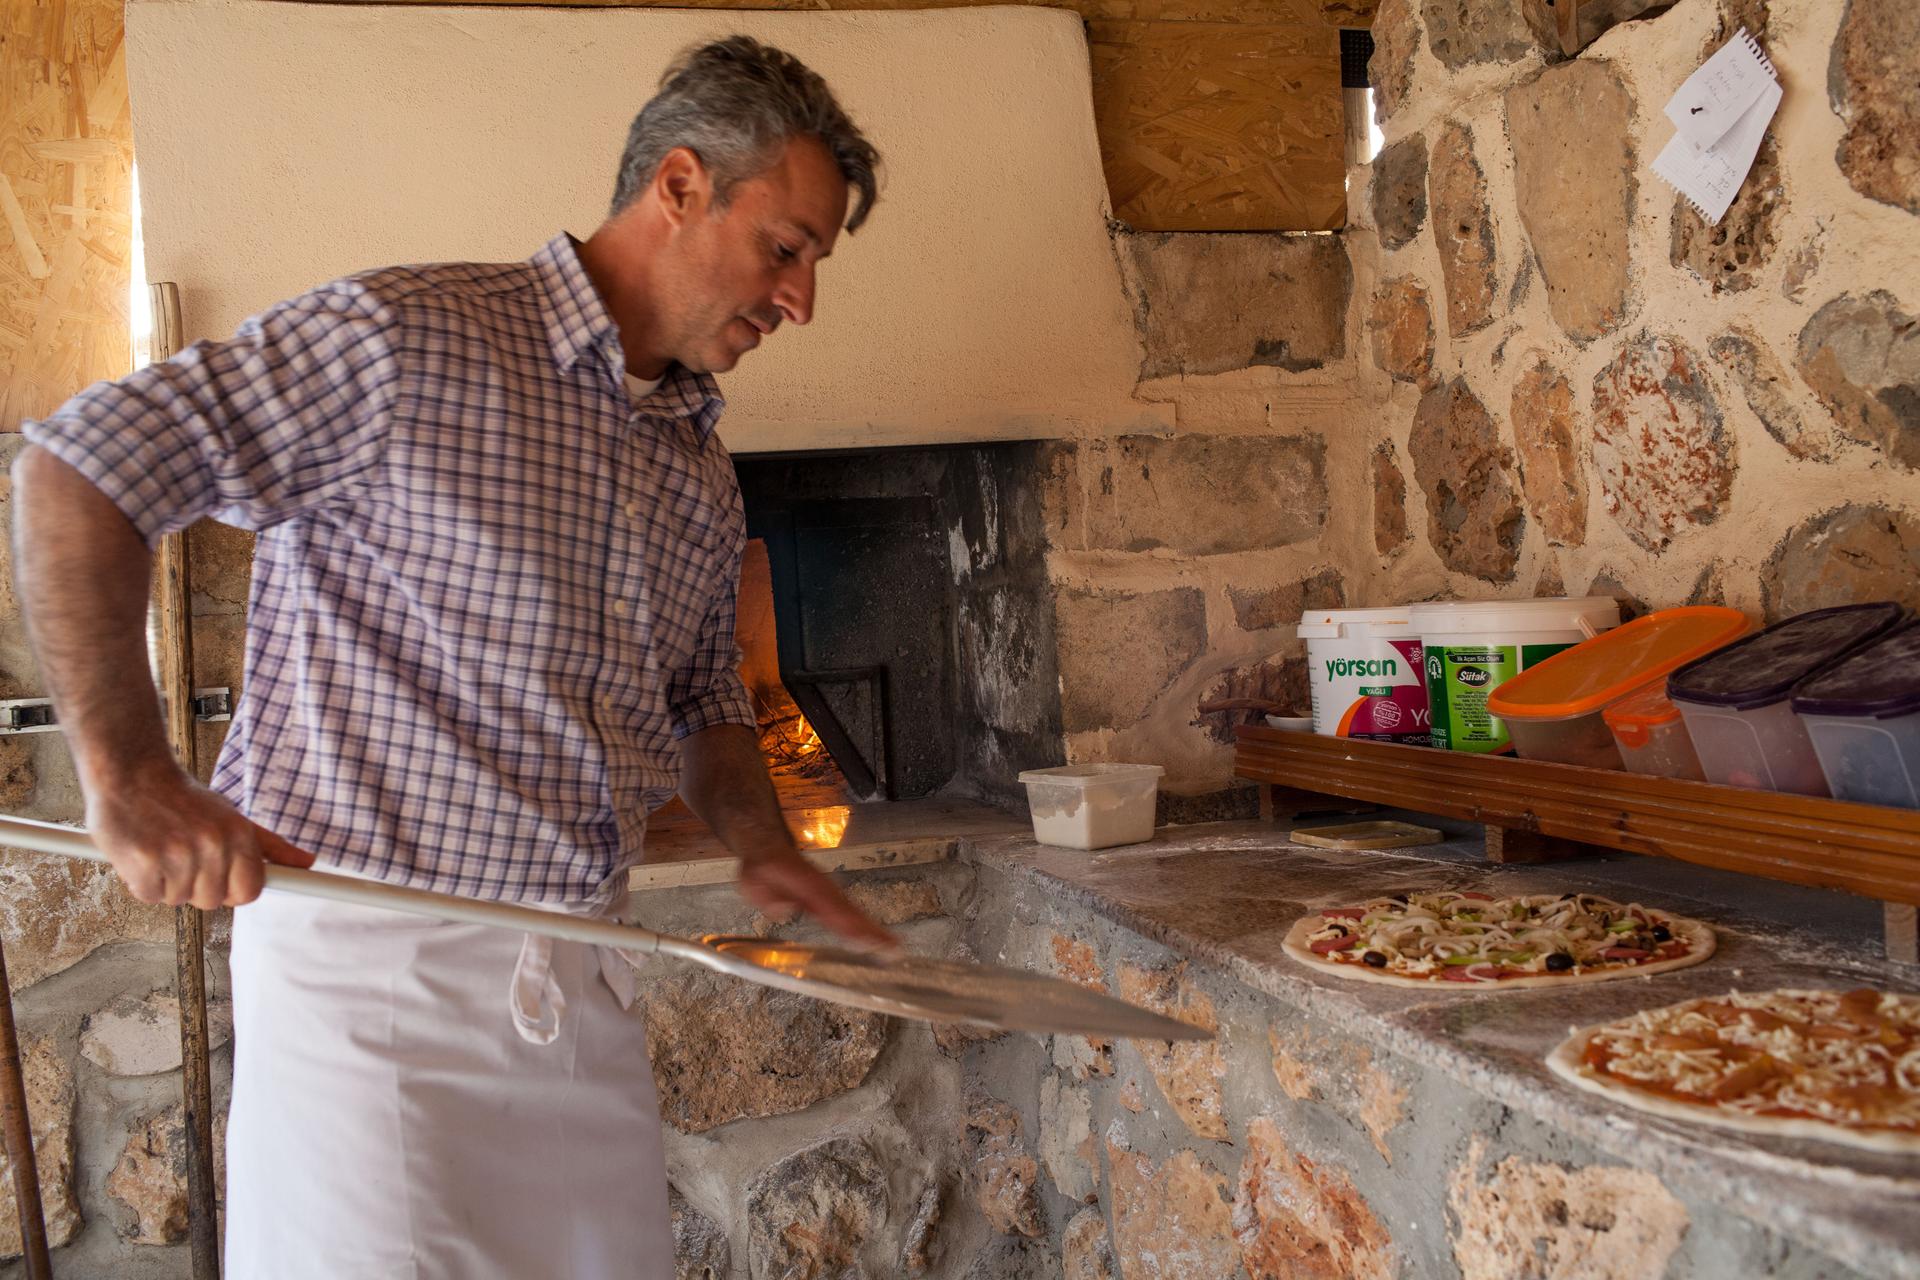 Nail Demir makes pizza in his ancestral village of Kafro in southern Turkey. Pizza isn’t a local delicacy – or at least it wasn’t – until Demir and others returned after decades in Europe.